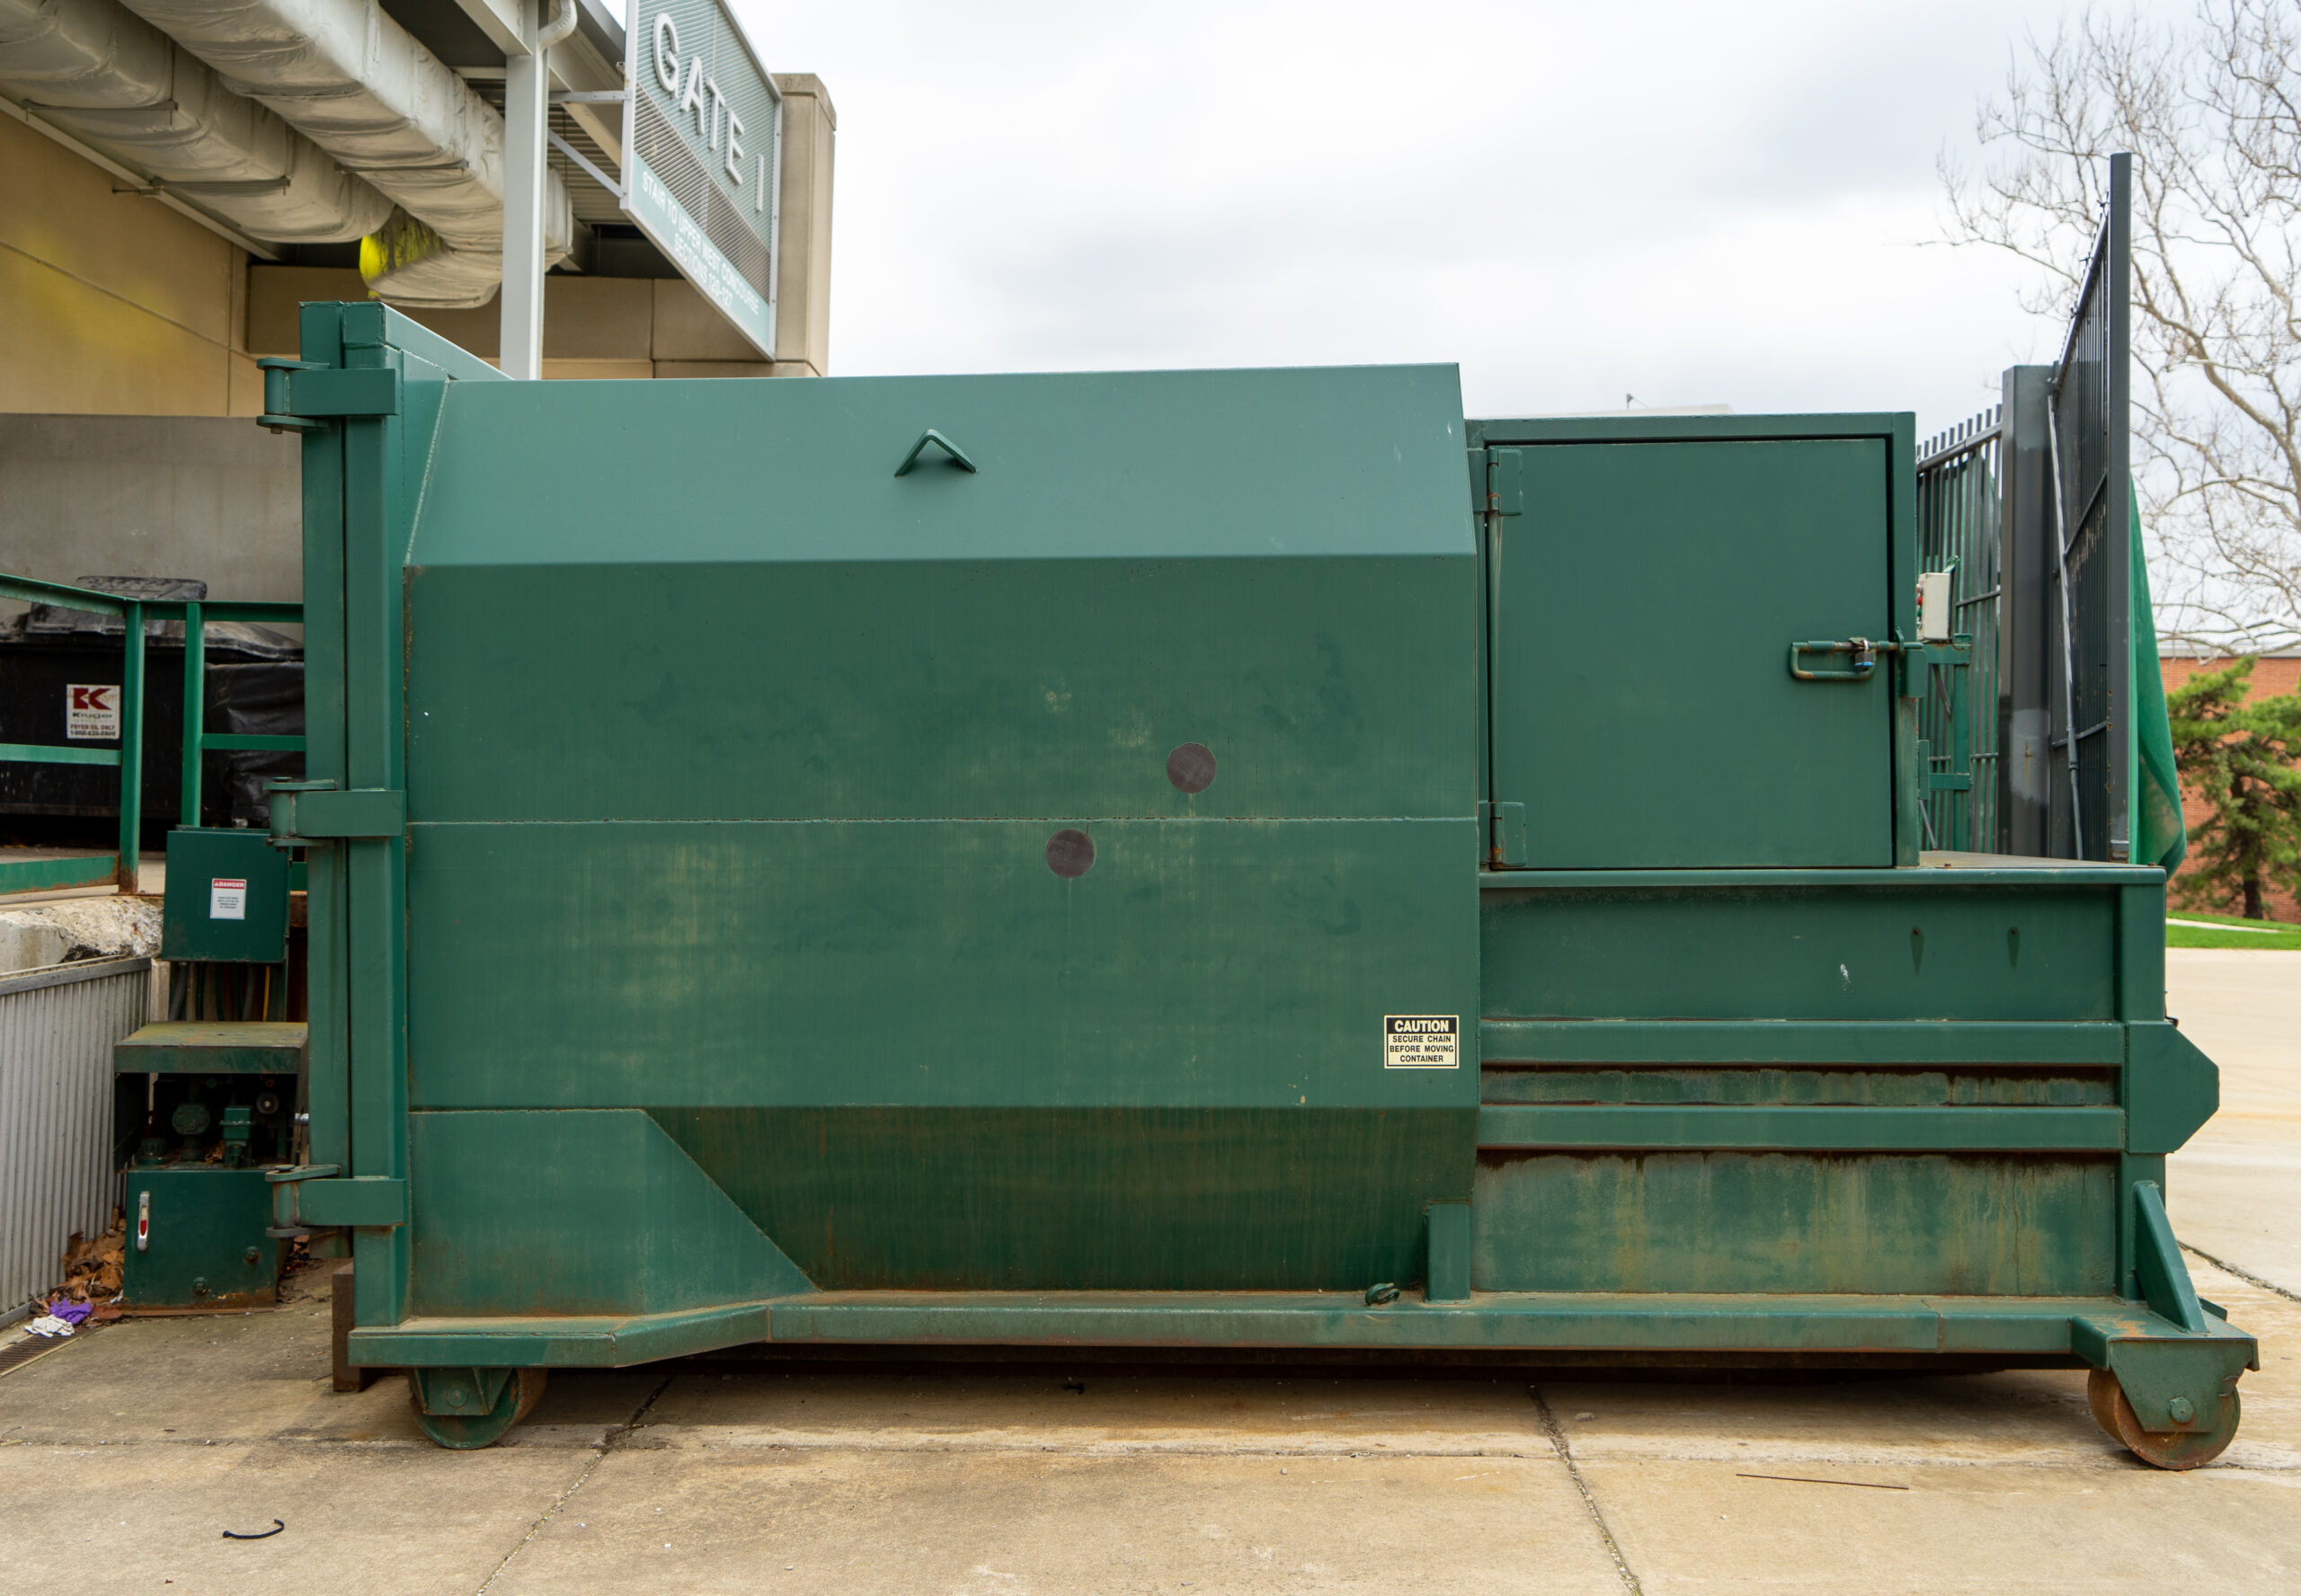 Spartan Stadium has its own cardboard compactor to recycle the large amounts of waste generated at football games.